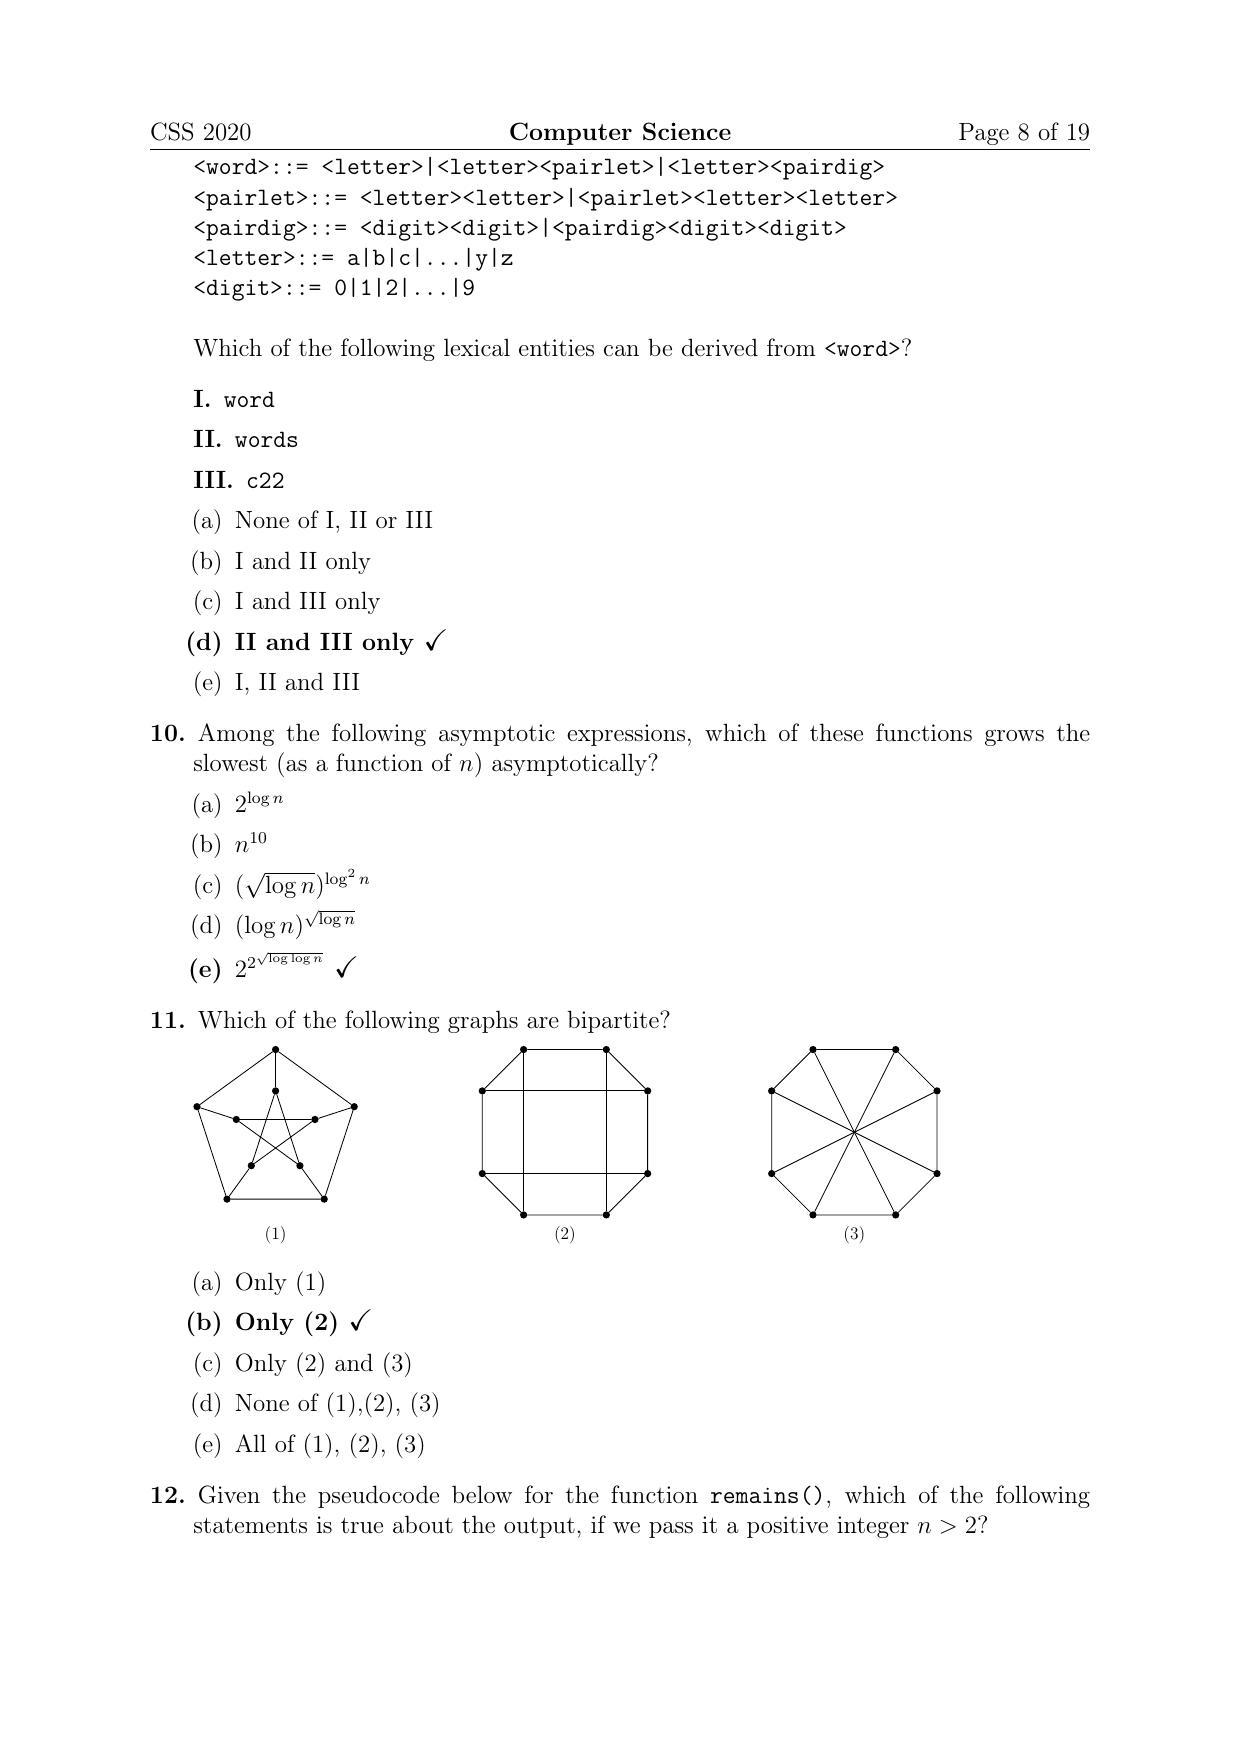 TIFR GS 2020 Computer & Systems Sciences Question Paper - Page 8